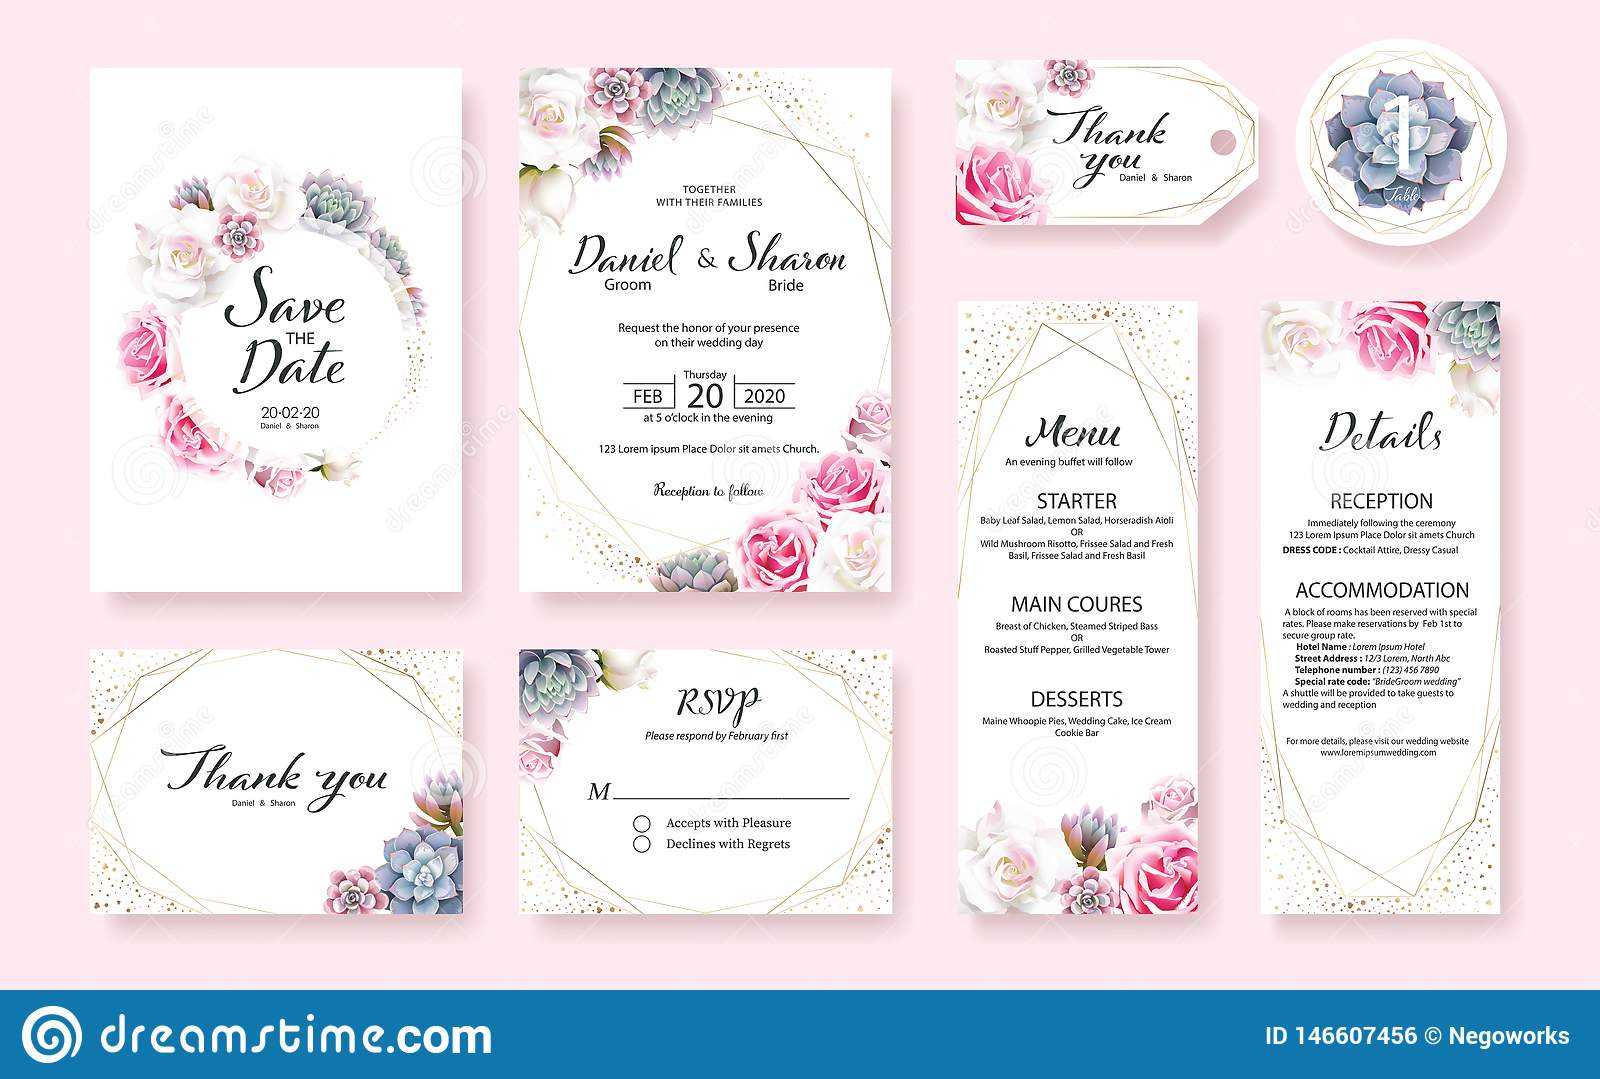 Floral Wedding Invitation Card, Save The Date, Thank You Regarding Table Reservation Card Template